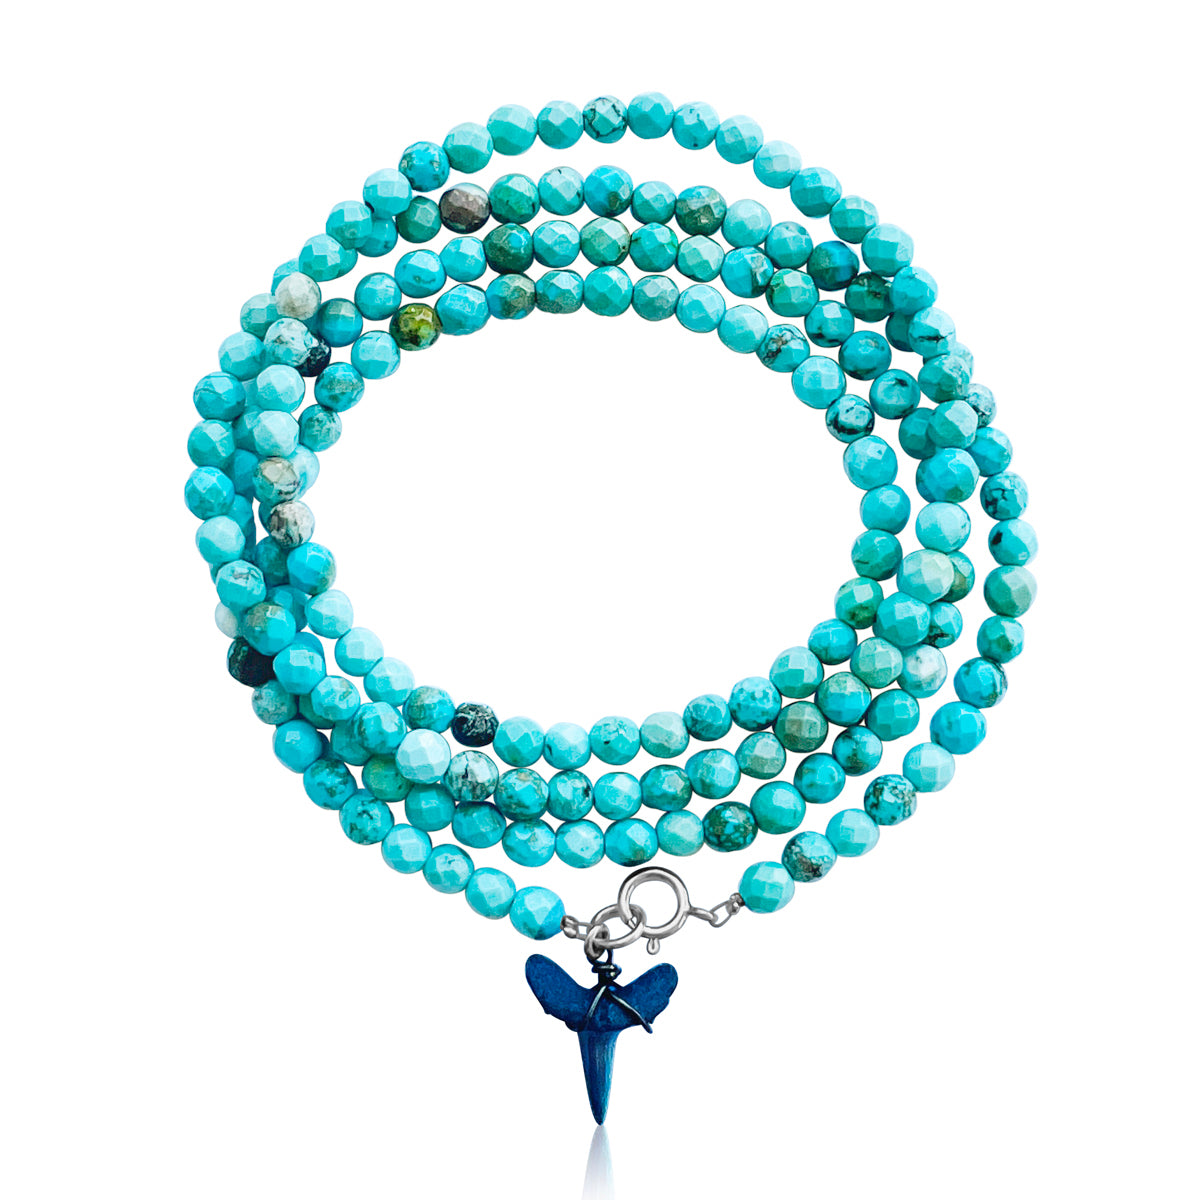 Turquoise Wrap Bracelet with Shark Tooth